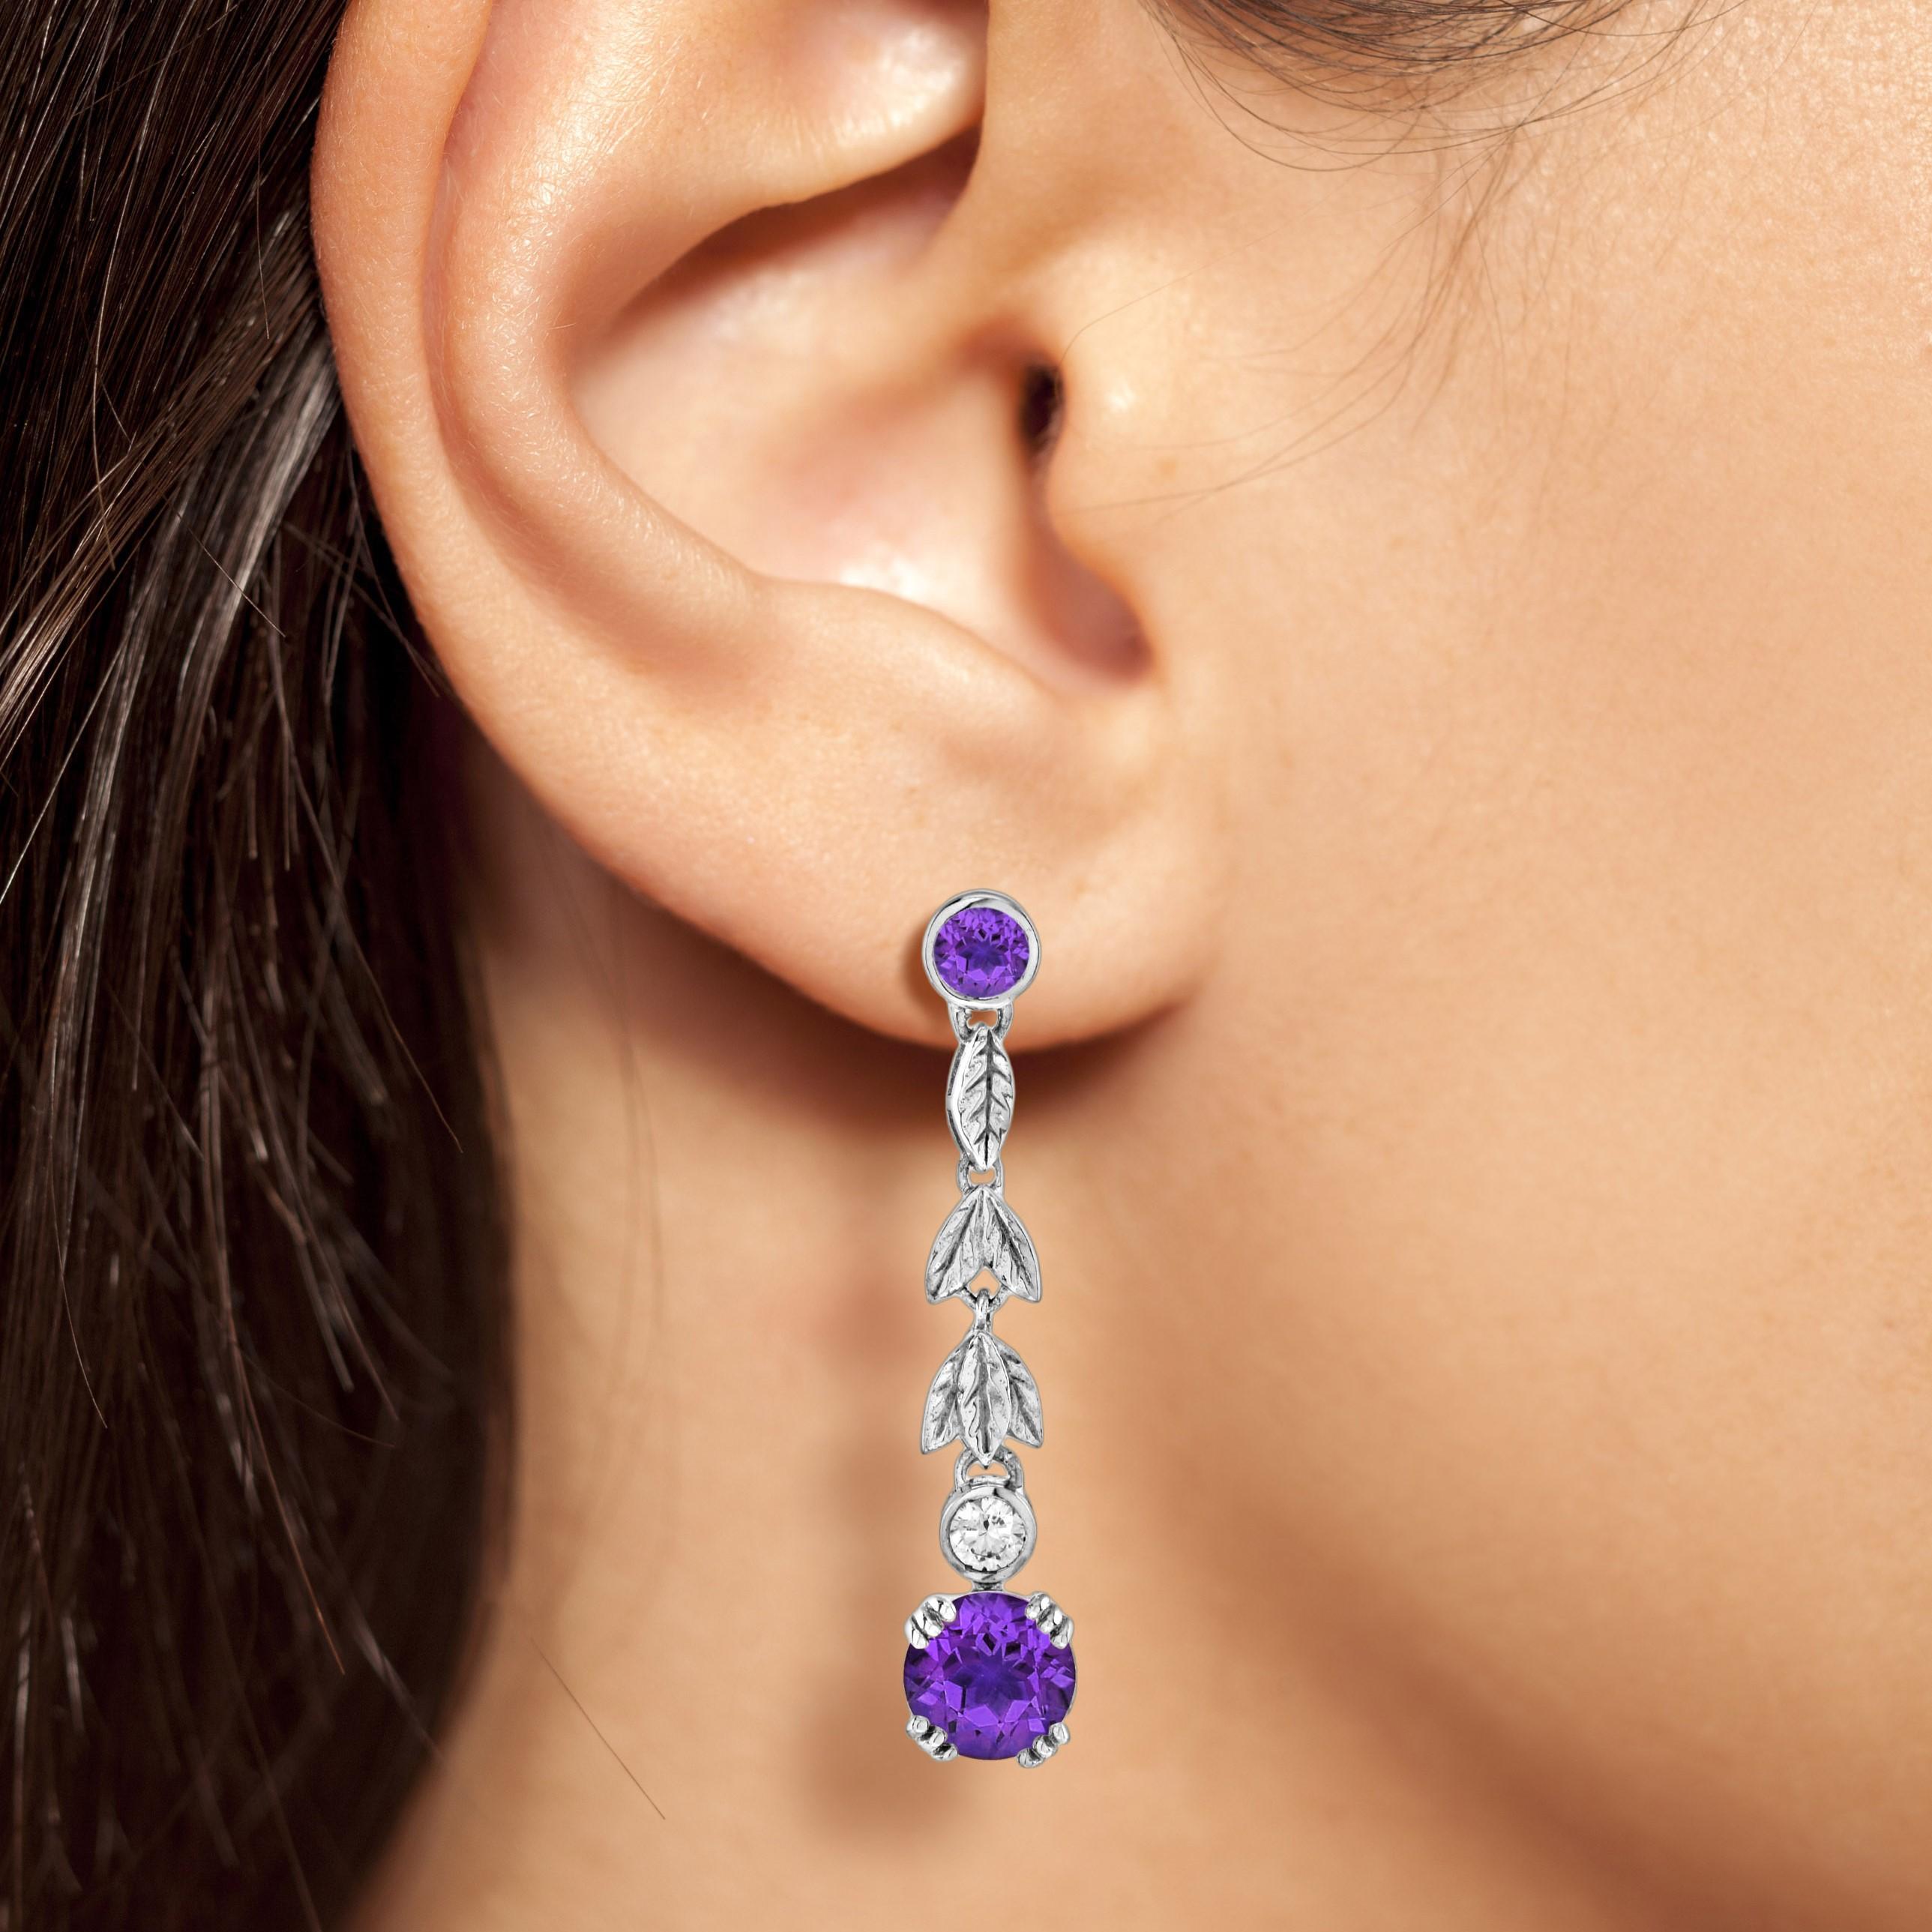 A cascading floral vines earring with a sophisticated, vintage allure. Strands of lustrous amethyst make these drop earrings the perfect finishing touch.

Information
Metal: 14K White Gold
Width: 7 mm.
Length: 35 mm.
Weight: 4.4 g. (approx. total